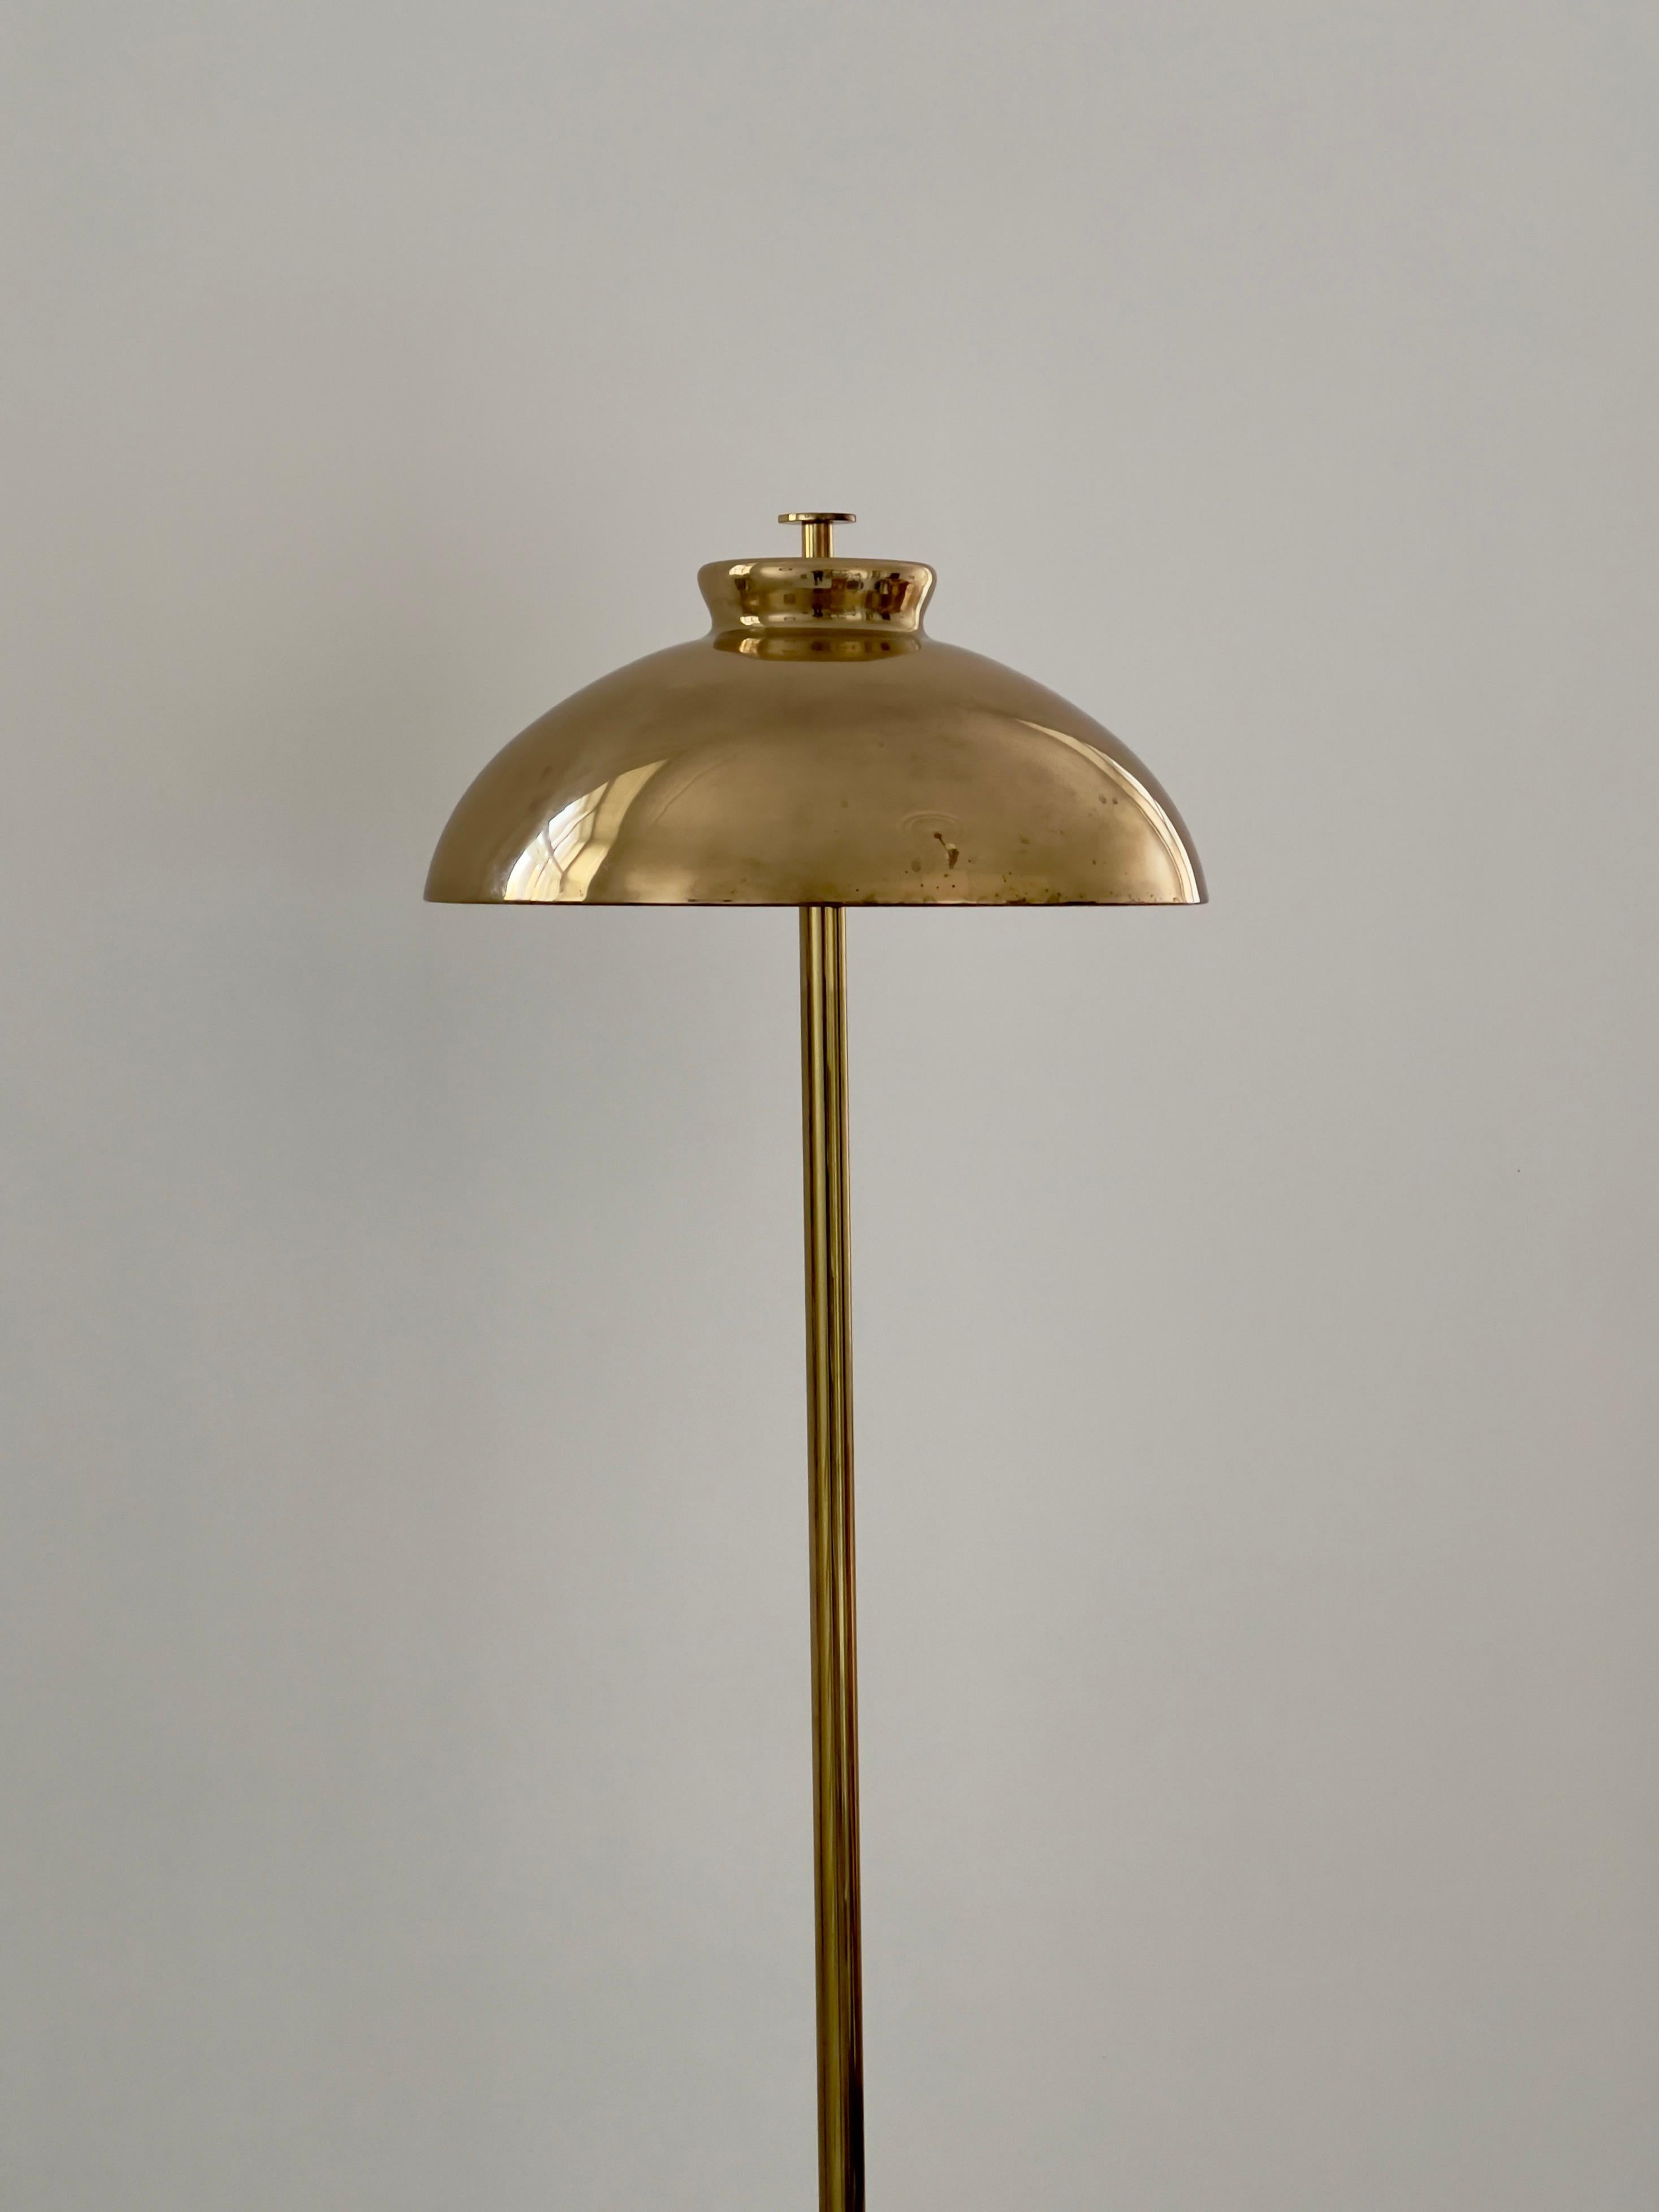 1960s Scandinavian Midcentury Floor Lamp in Patinated Brass with Perforated Top For Sale 3